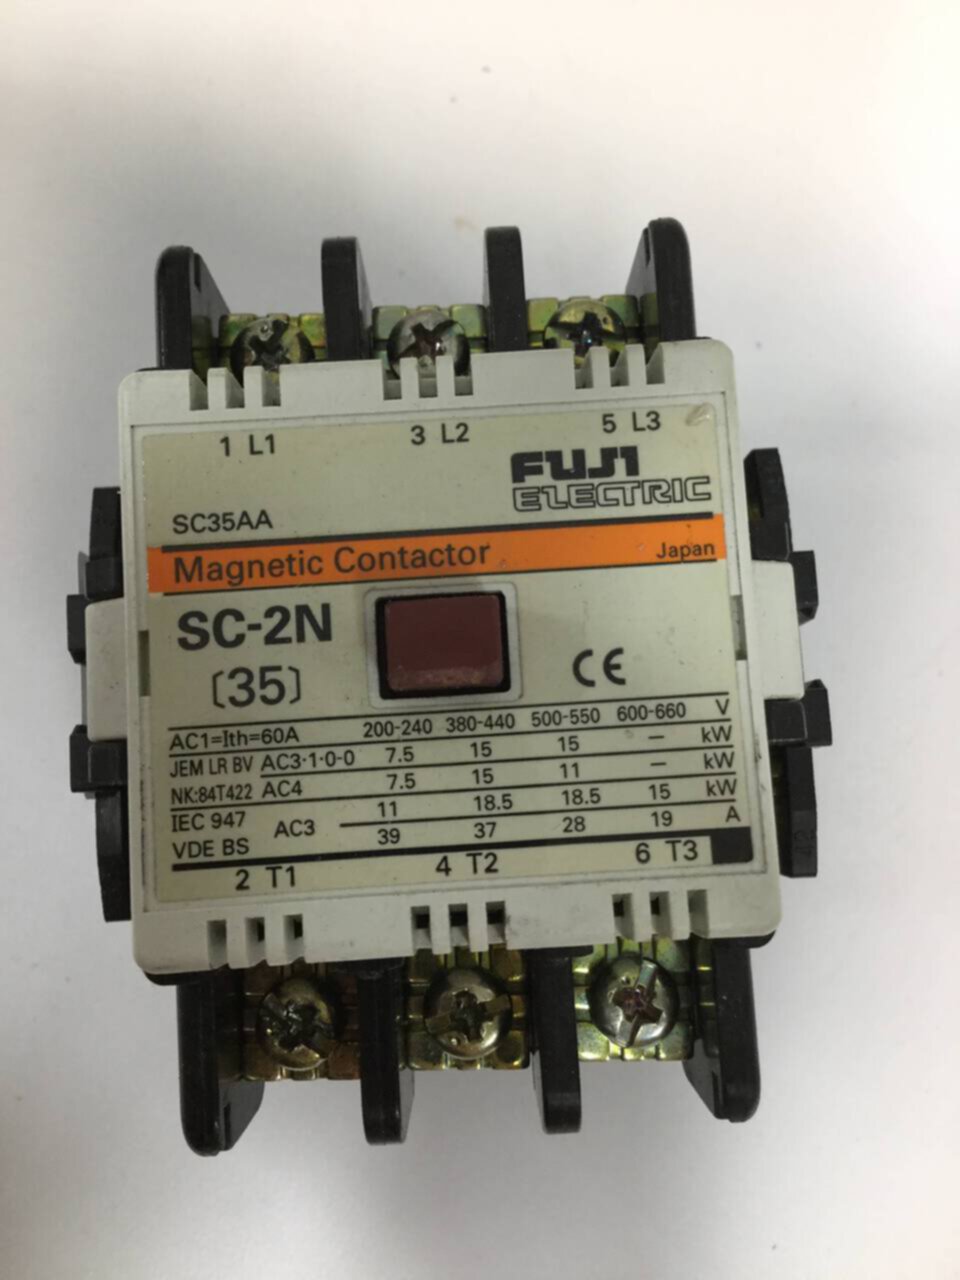 Fuji Electric Sc-2n Contactor 3 Pole 220 Volt Coil SC35AA for sale online 